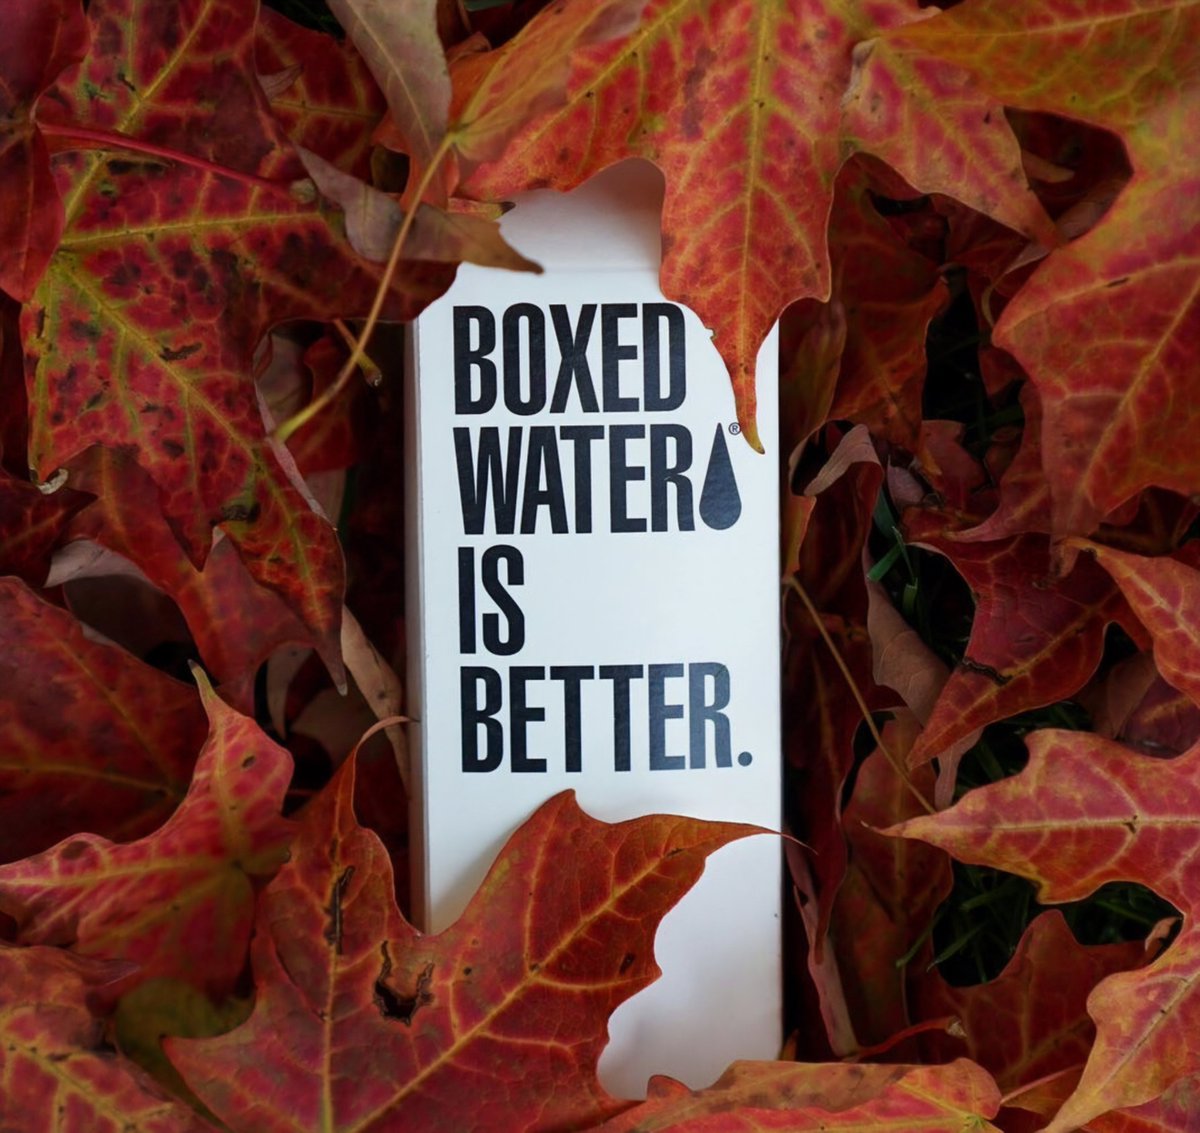 Boxed Water is an United States company that created a water packaged in a more environmentally-friendly way. 🏷@boxedwater #ecobrand #ecofriendly #noplastic #boxedwaterisbetter #resetandtryagain © Photo by Boxed Water Is Better on Unsplash